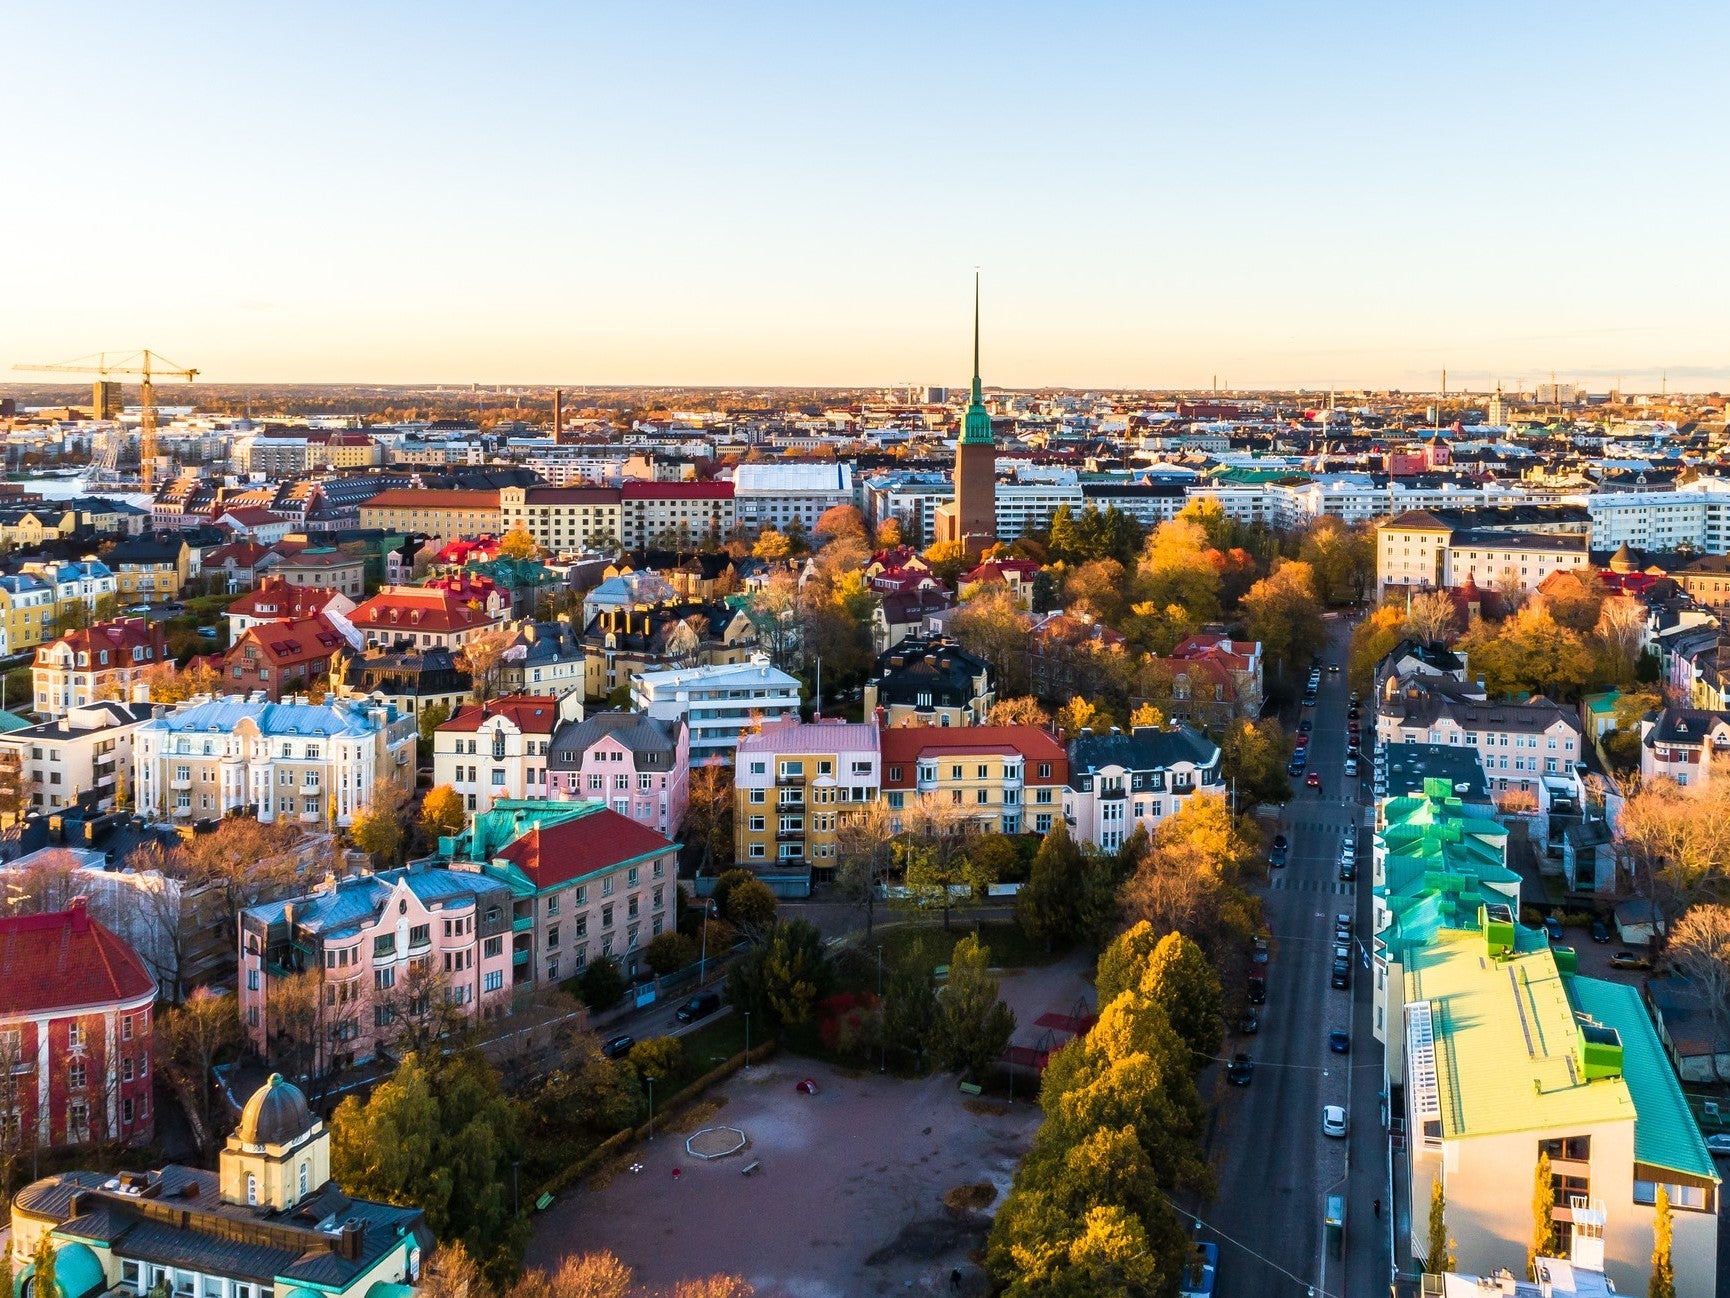 Panoramic view of Helsinki at sunset